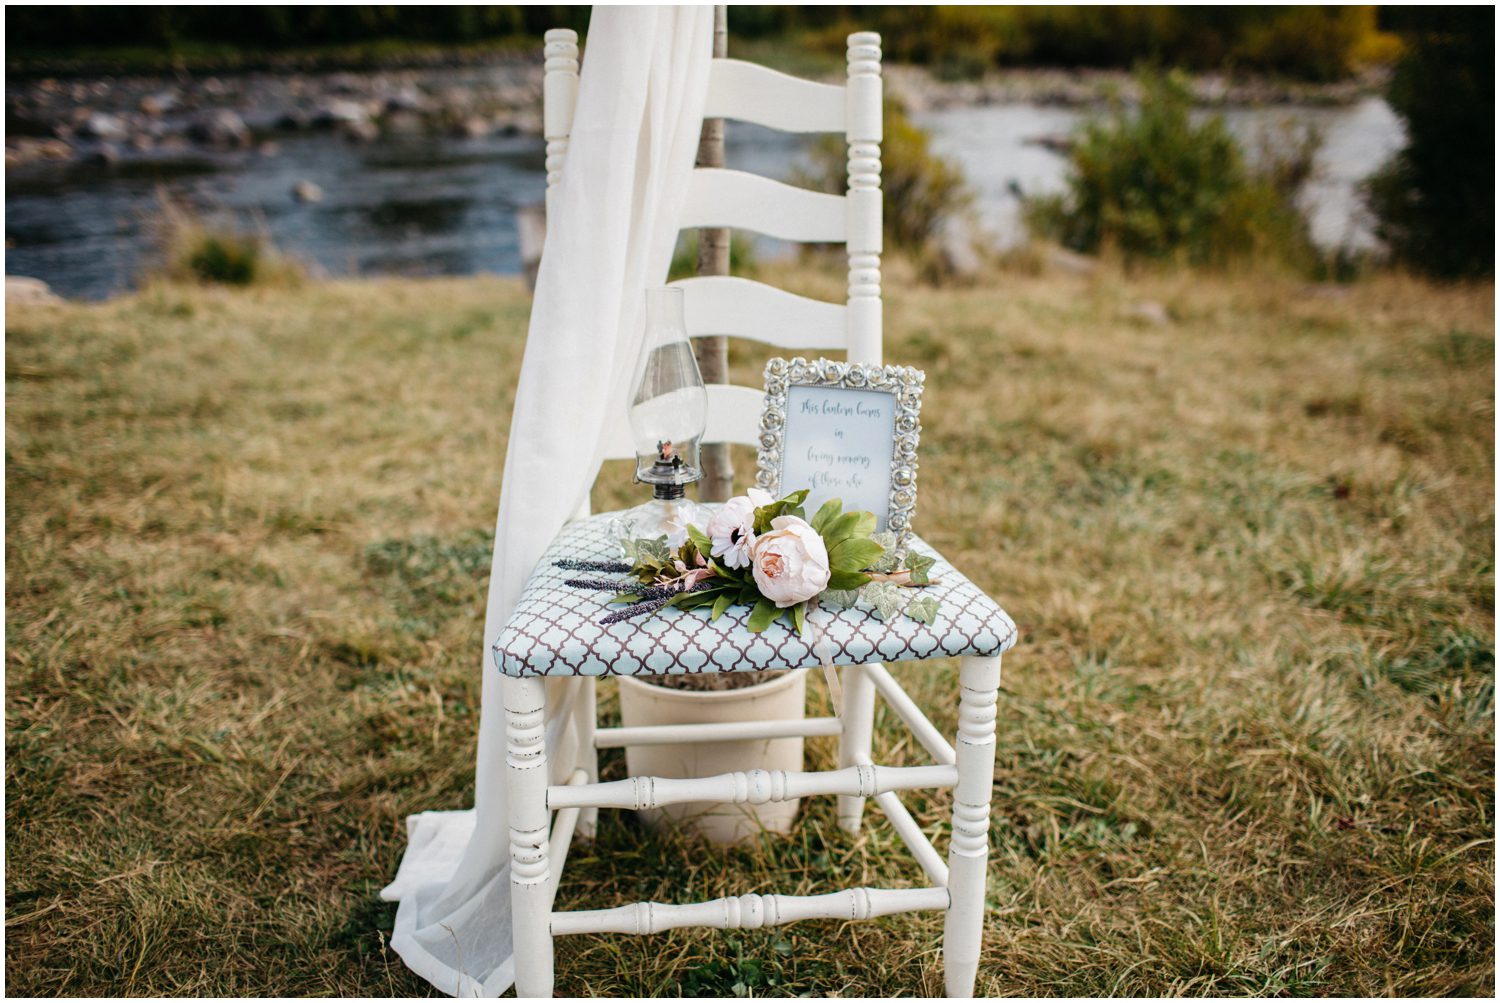 Tribute to loved ones for wedding day, Empty chair during wedding ceremony, Tribute to family who passed away for wedding, Double A Barn Wedding Photos, Double A Barn Grand Lake Colorado, AA Barn Grand Lake Colorado, Double A Barn Wedding Photos, Grand lake Wedding Photographer, Colorado Wedding Photographer, Boho Wedding inspiration, Rustic wedding inspiration, Vintage Wedding inspiration